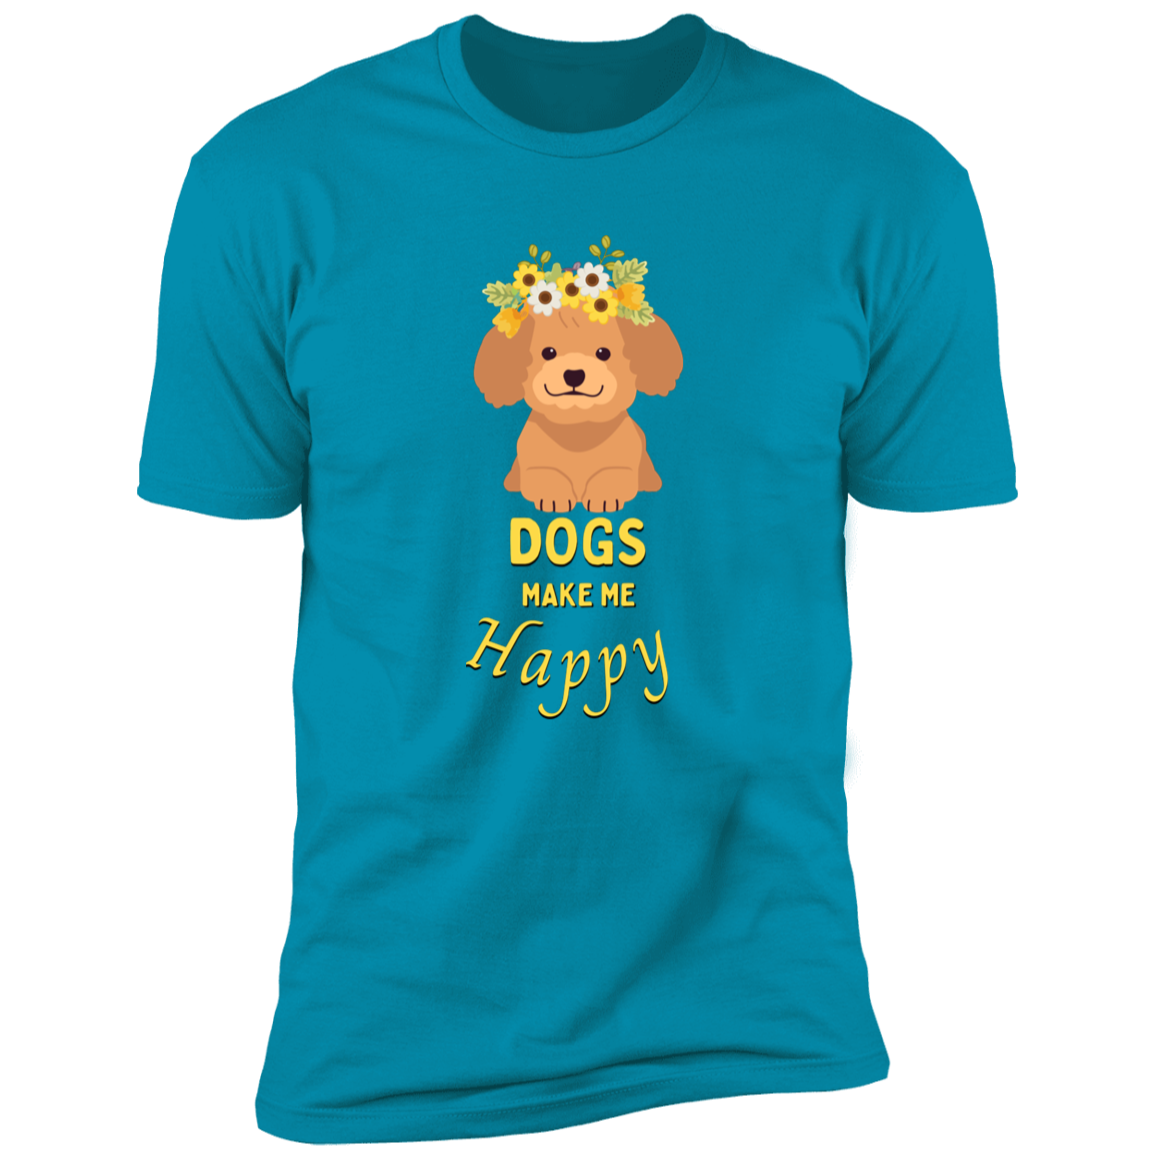 Dogs Make Me Happy t-shirt, funny dog shirt for humans, in turquoise